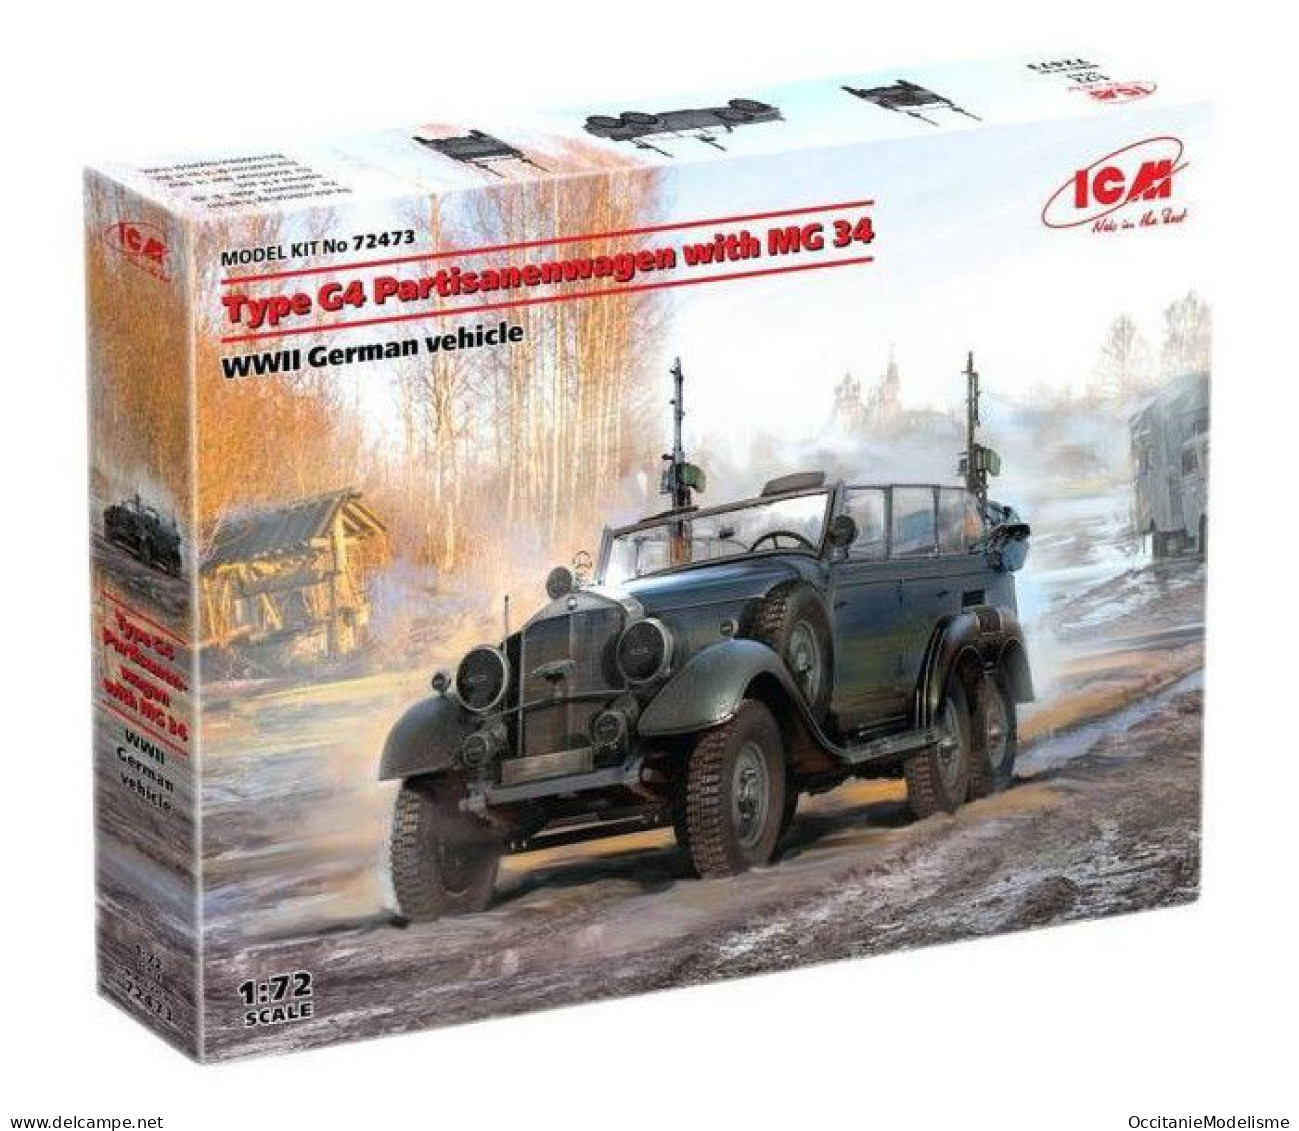 ICM - MERCEDES-BENZ TYPE G4 Partisanenwagen MG34 WWII Maquette Kit Plastique Réf. 72473 Neuf NBO 1/72 - Military Vehicles